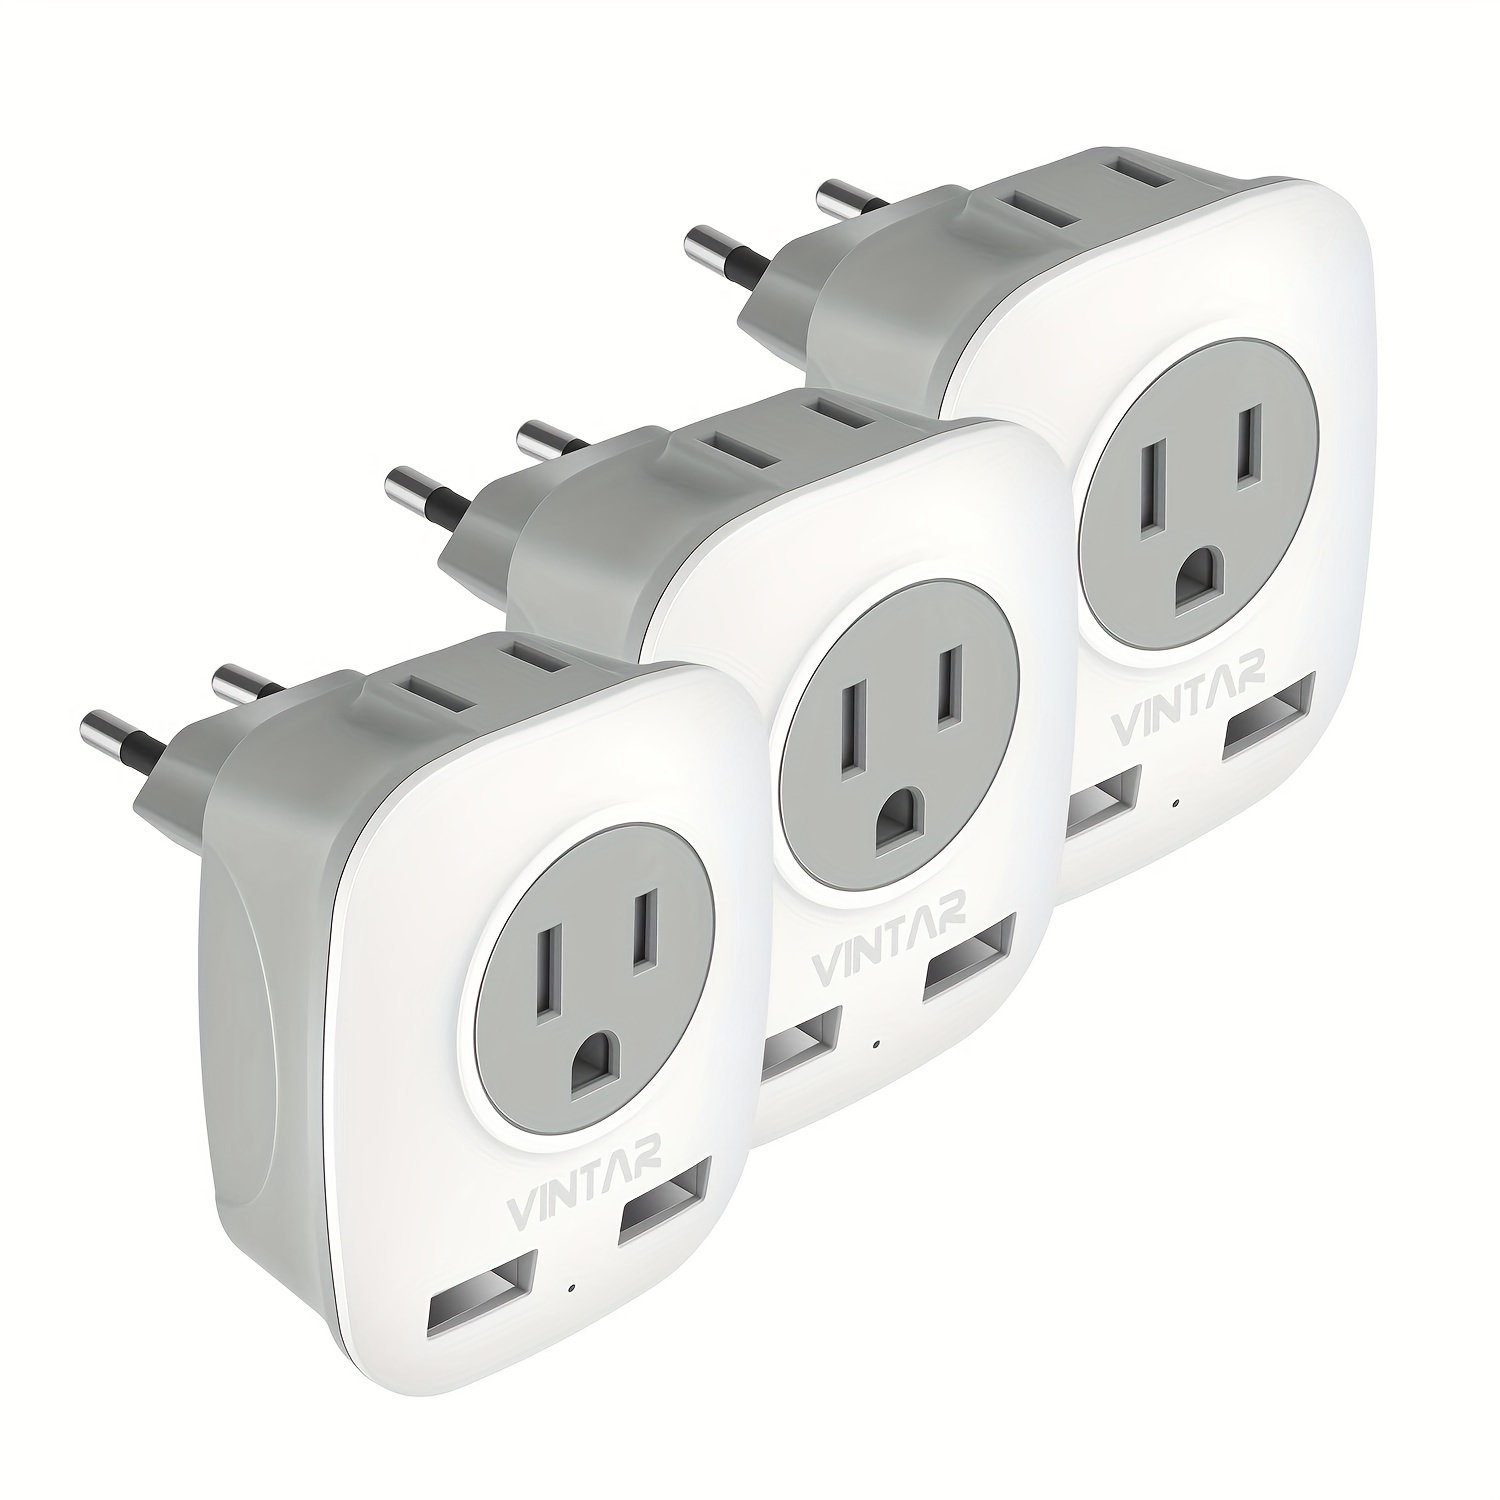 

[2/3-pack] European Travel Plug Adapter, Vintar International Power Plug Adapter With 2 Usb Ports, 2 American Outlets- 4 In 1 Outlet Adapter, Travel Essentials To Italy, Greece, France, Spain (type C)